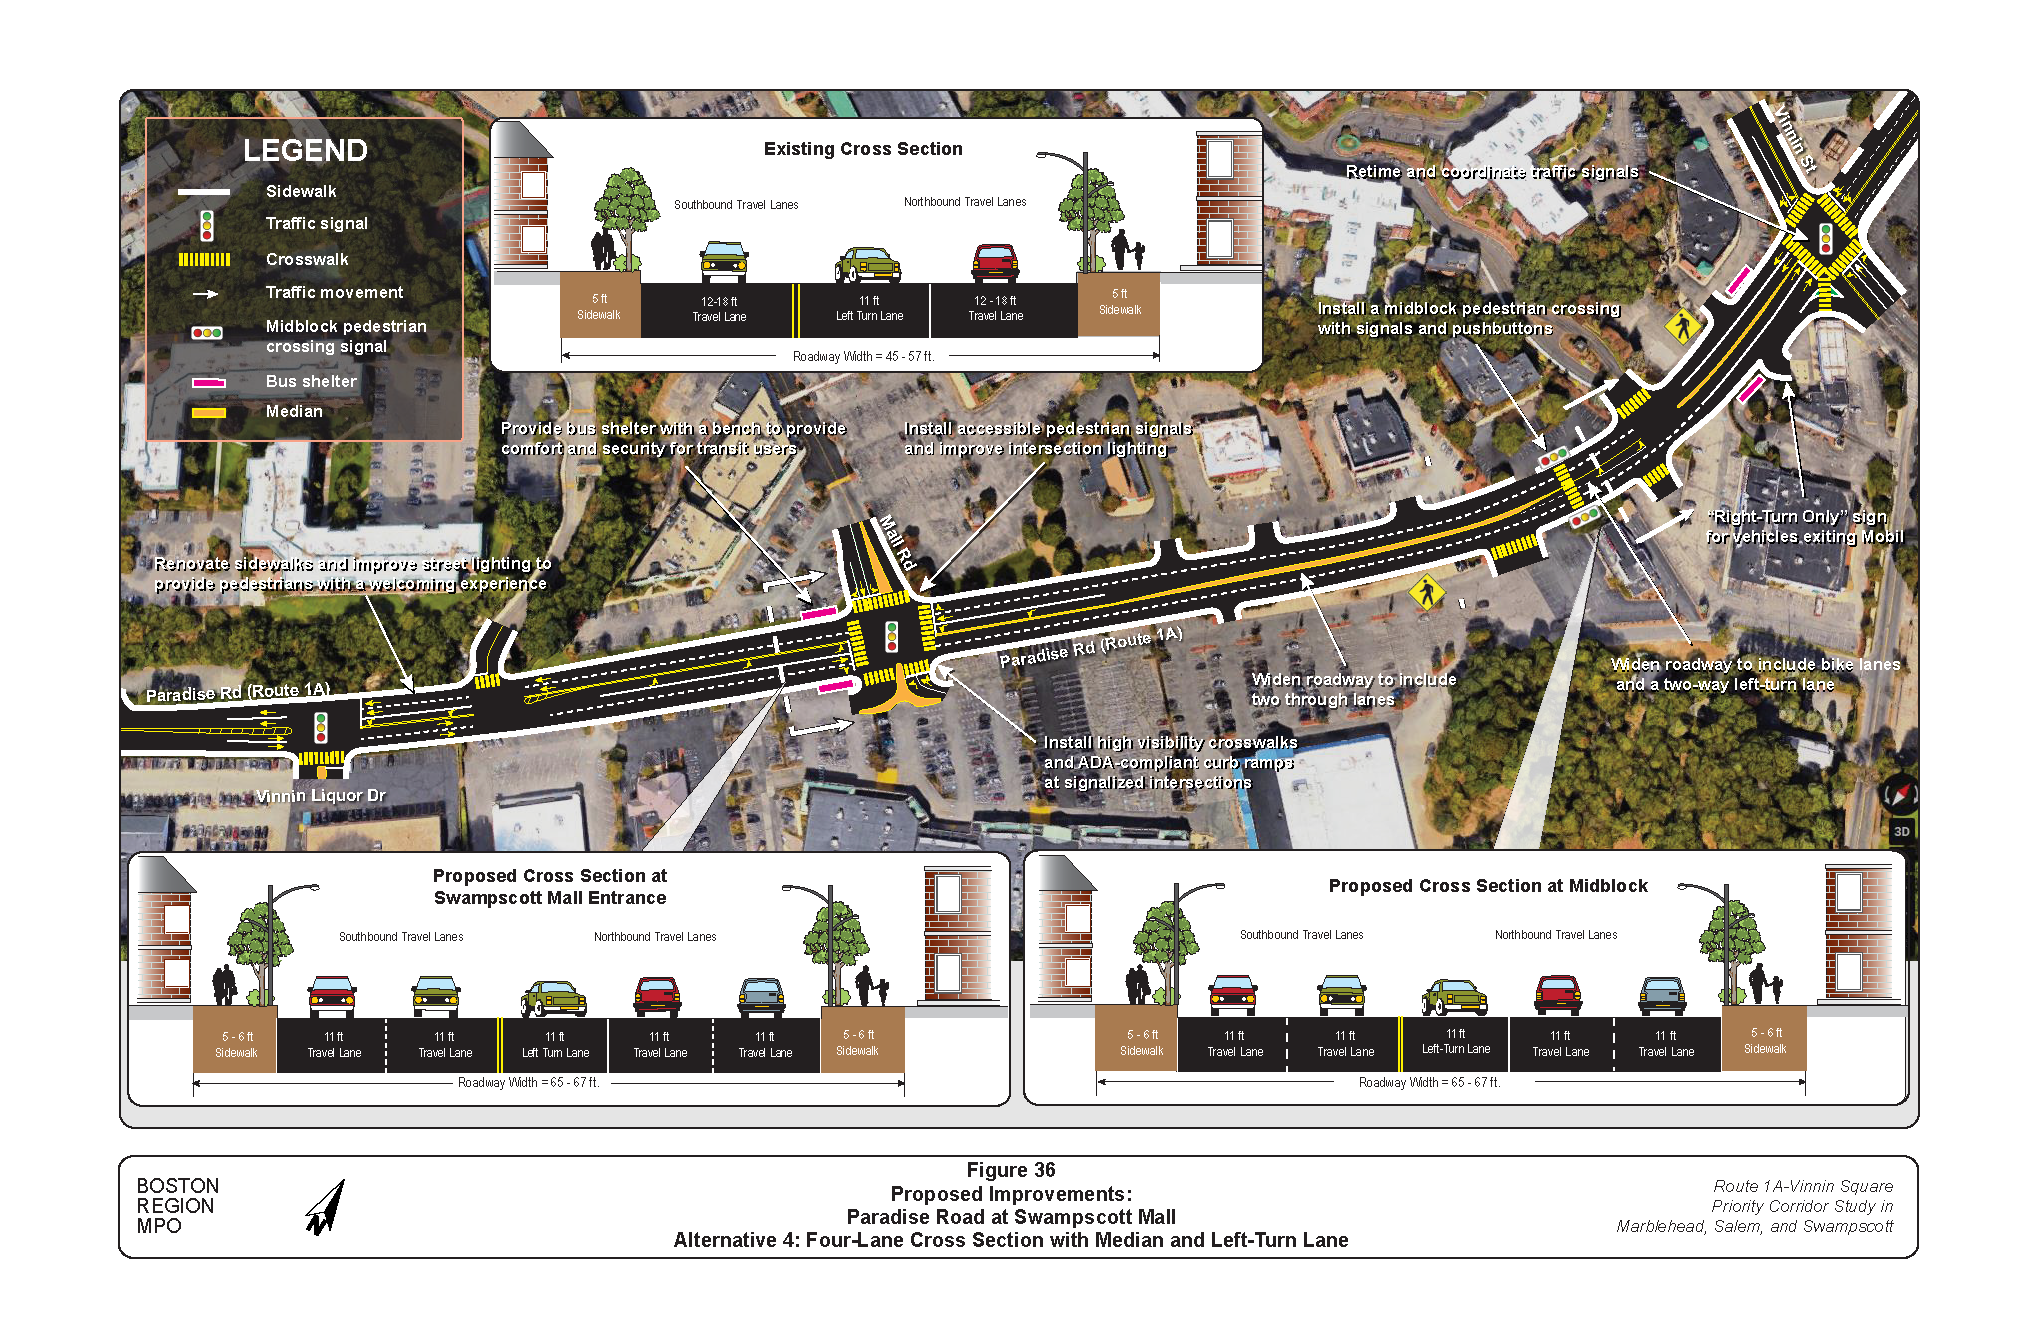 FIGURE 36. Proposed Improvements, Alternative 4: Paradise Road at Swampscott Mall.Figure 36 is a map of Paradise Road at Swampscott Mall showing the location of proposed improvements in Alternative 4. The proposed improvements are described in text boxes. Graphics embedded show proposed roadway cross sections with lane widths.